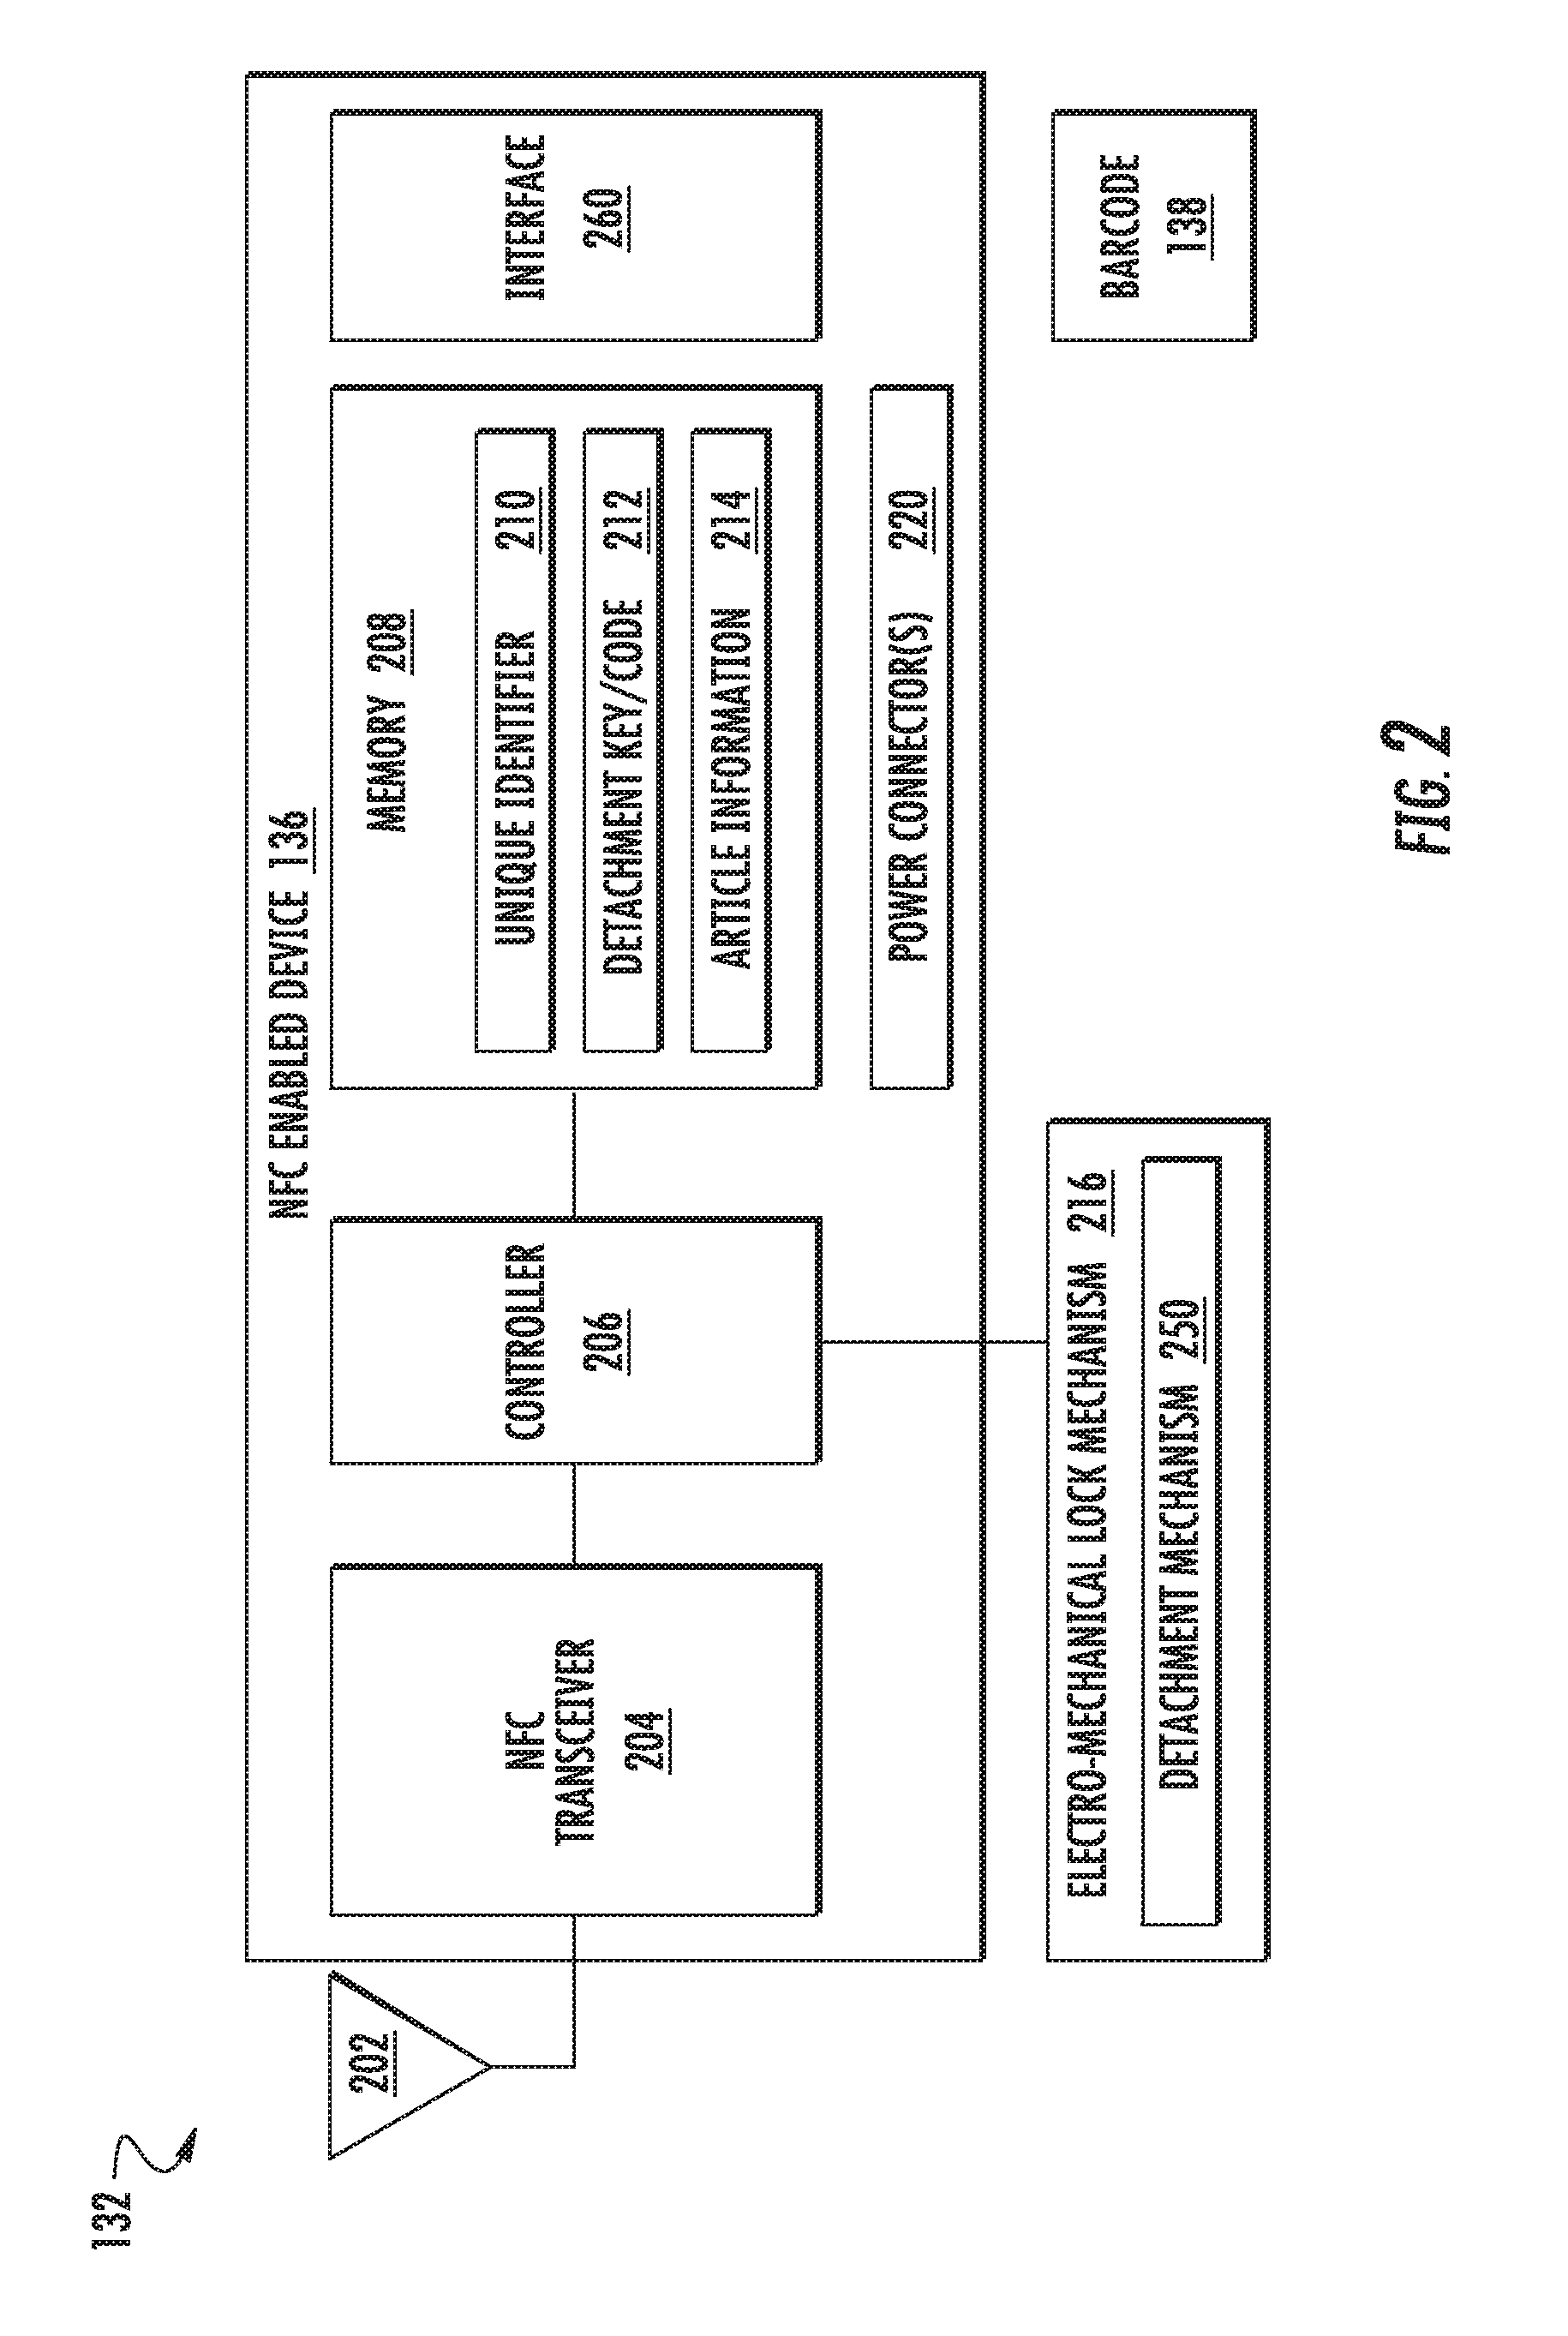 Self-detaching Anti-theft device with power removal station